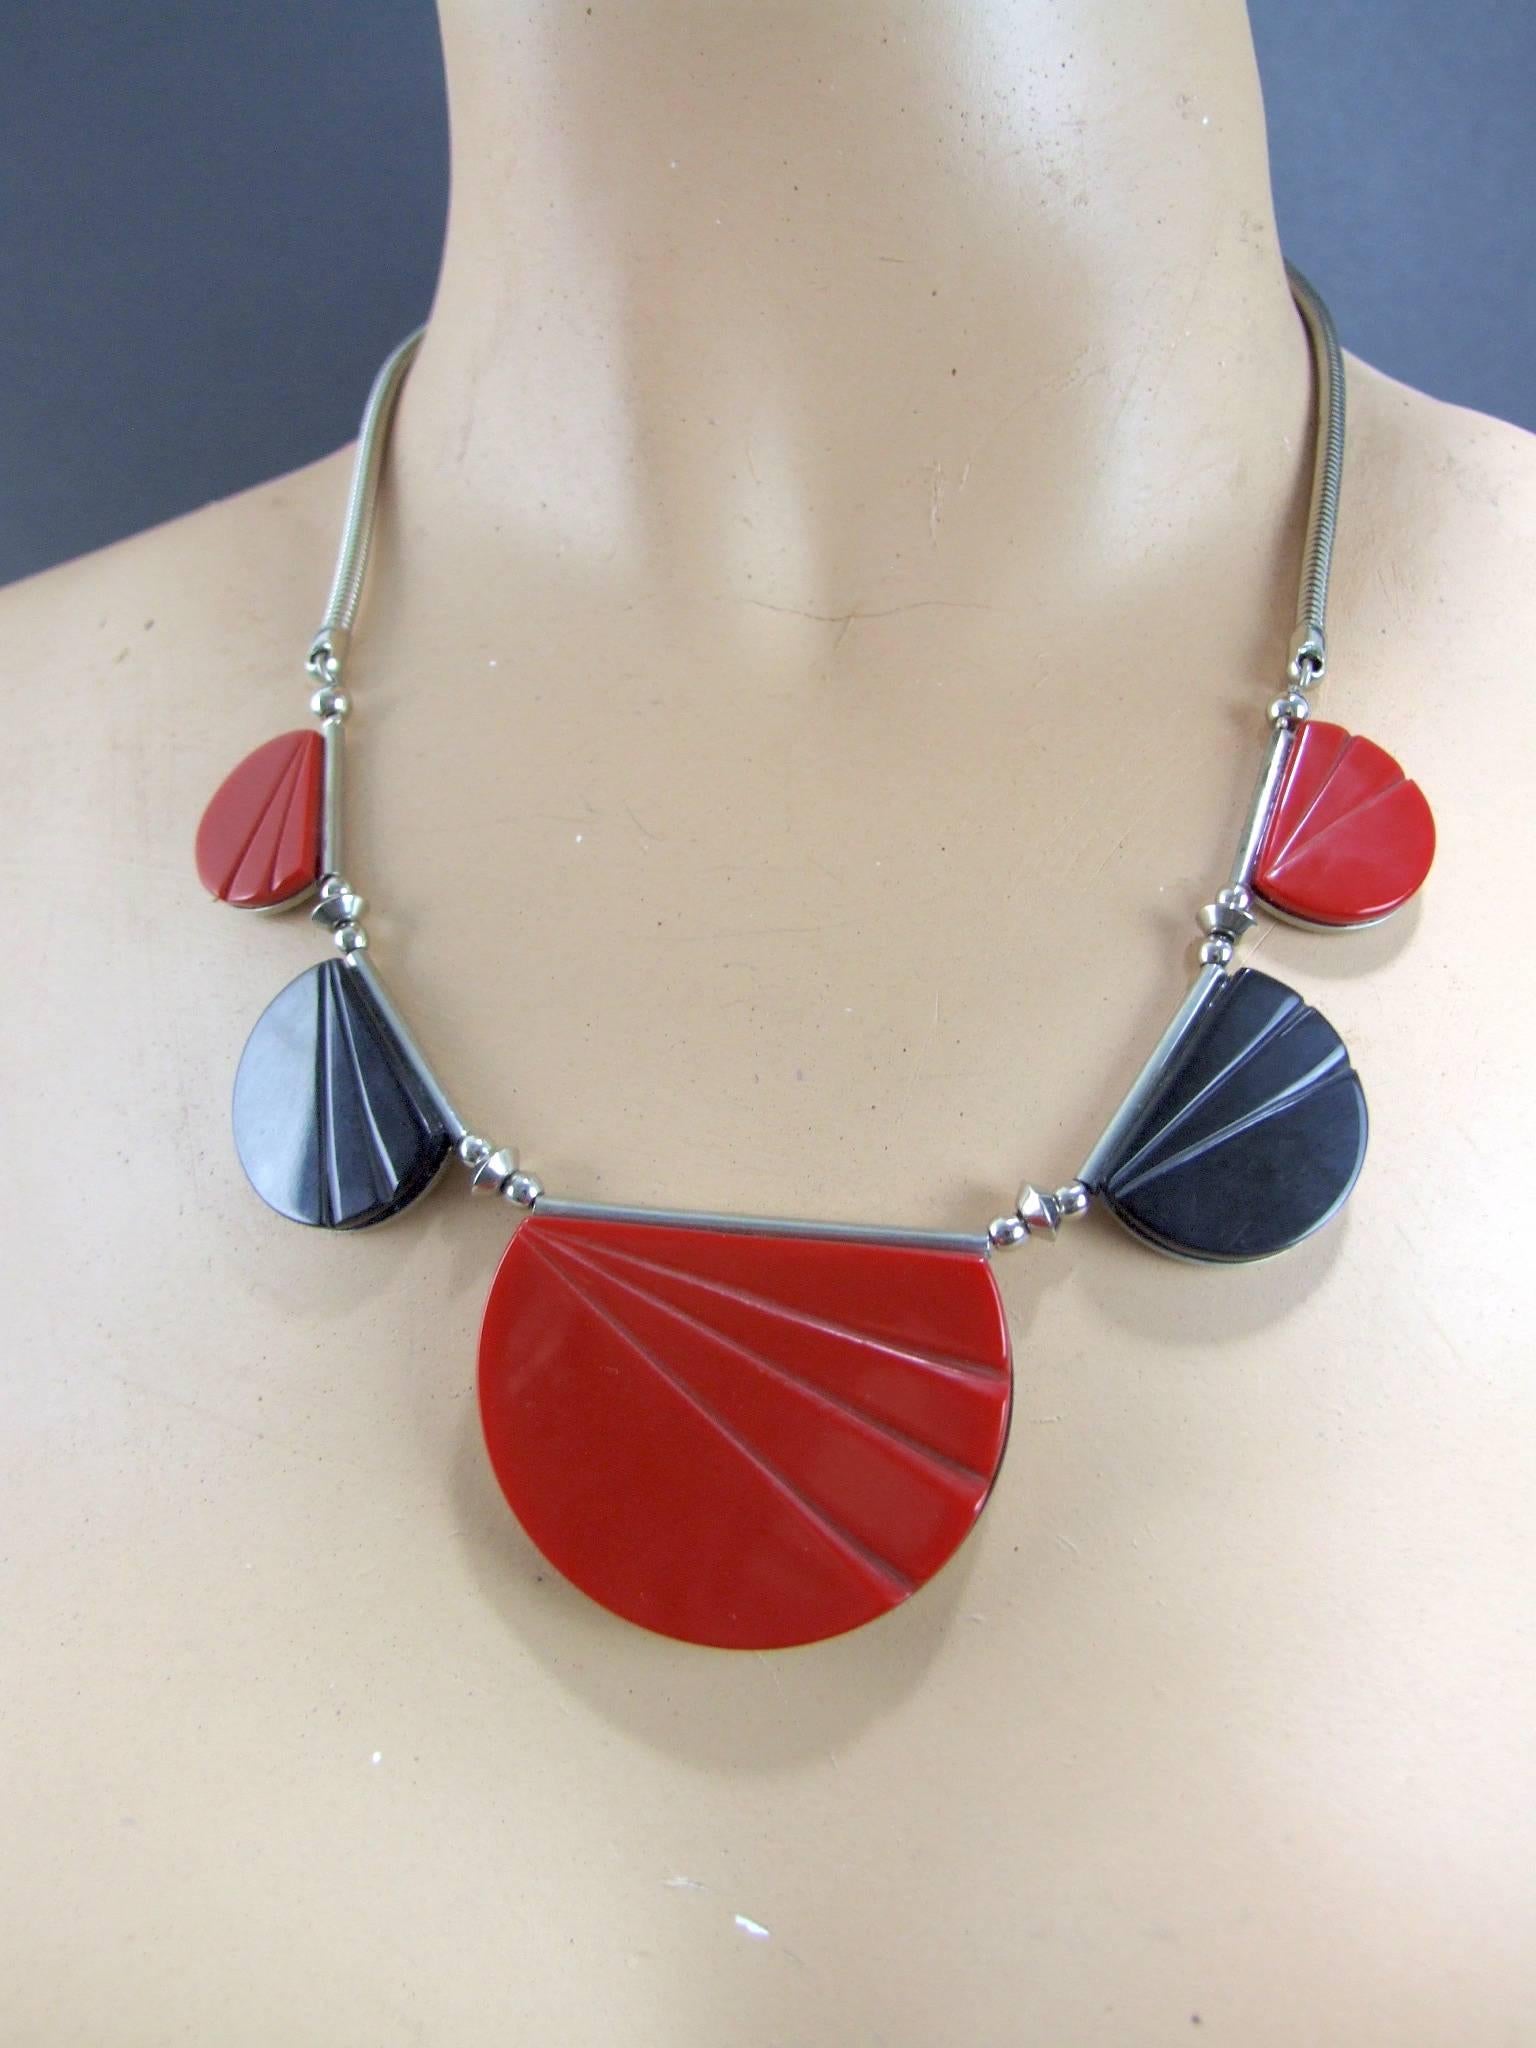 Modernist Art Deco Necklace by Jakob Bengel, circa 1930 In Excellent Condition For Sale In Warlingham, GB